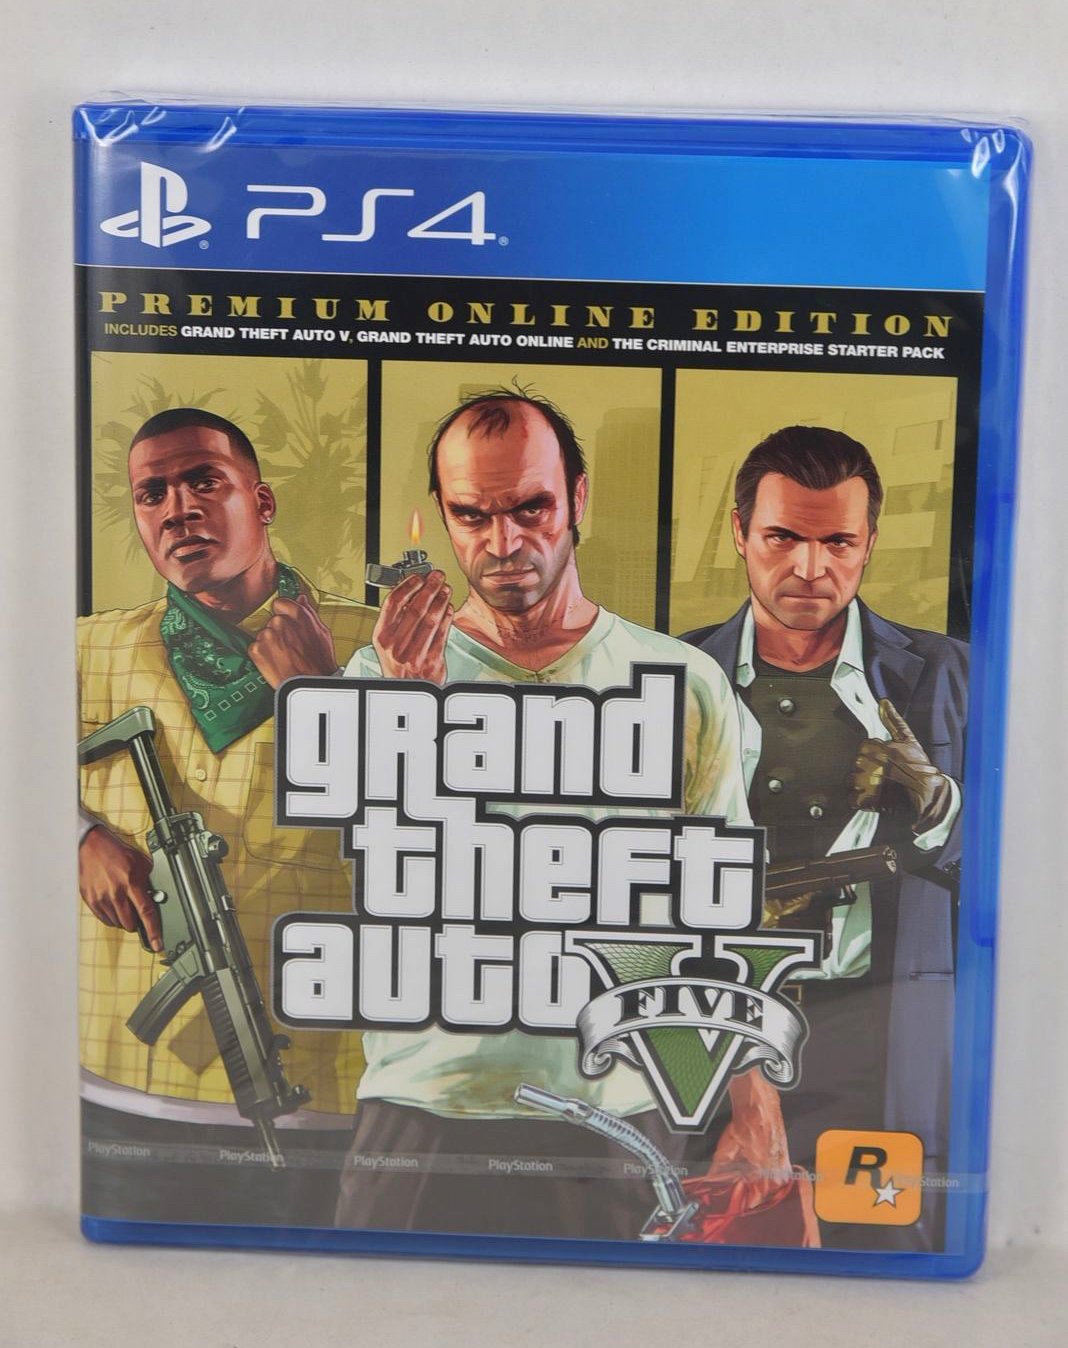 GTA Series Videos on Twitter: "Here's the PS4 cover of Grand Theft Auto V Premium Online Edition will be released in It includes GTA GTA Online and the